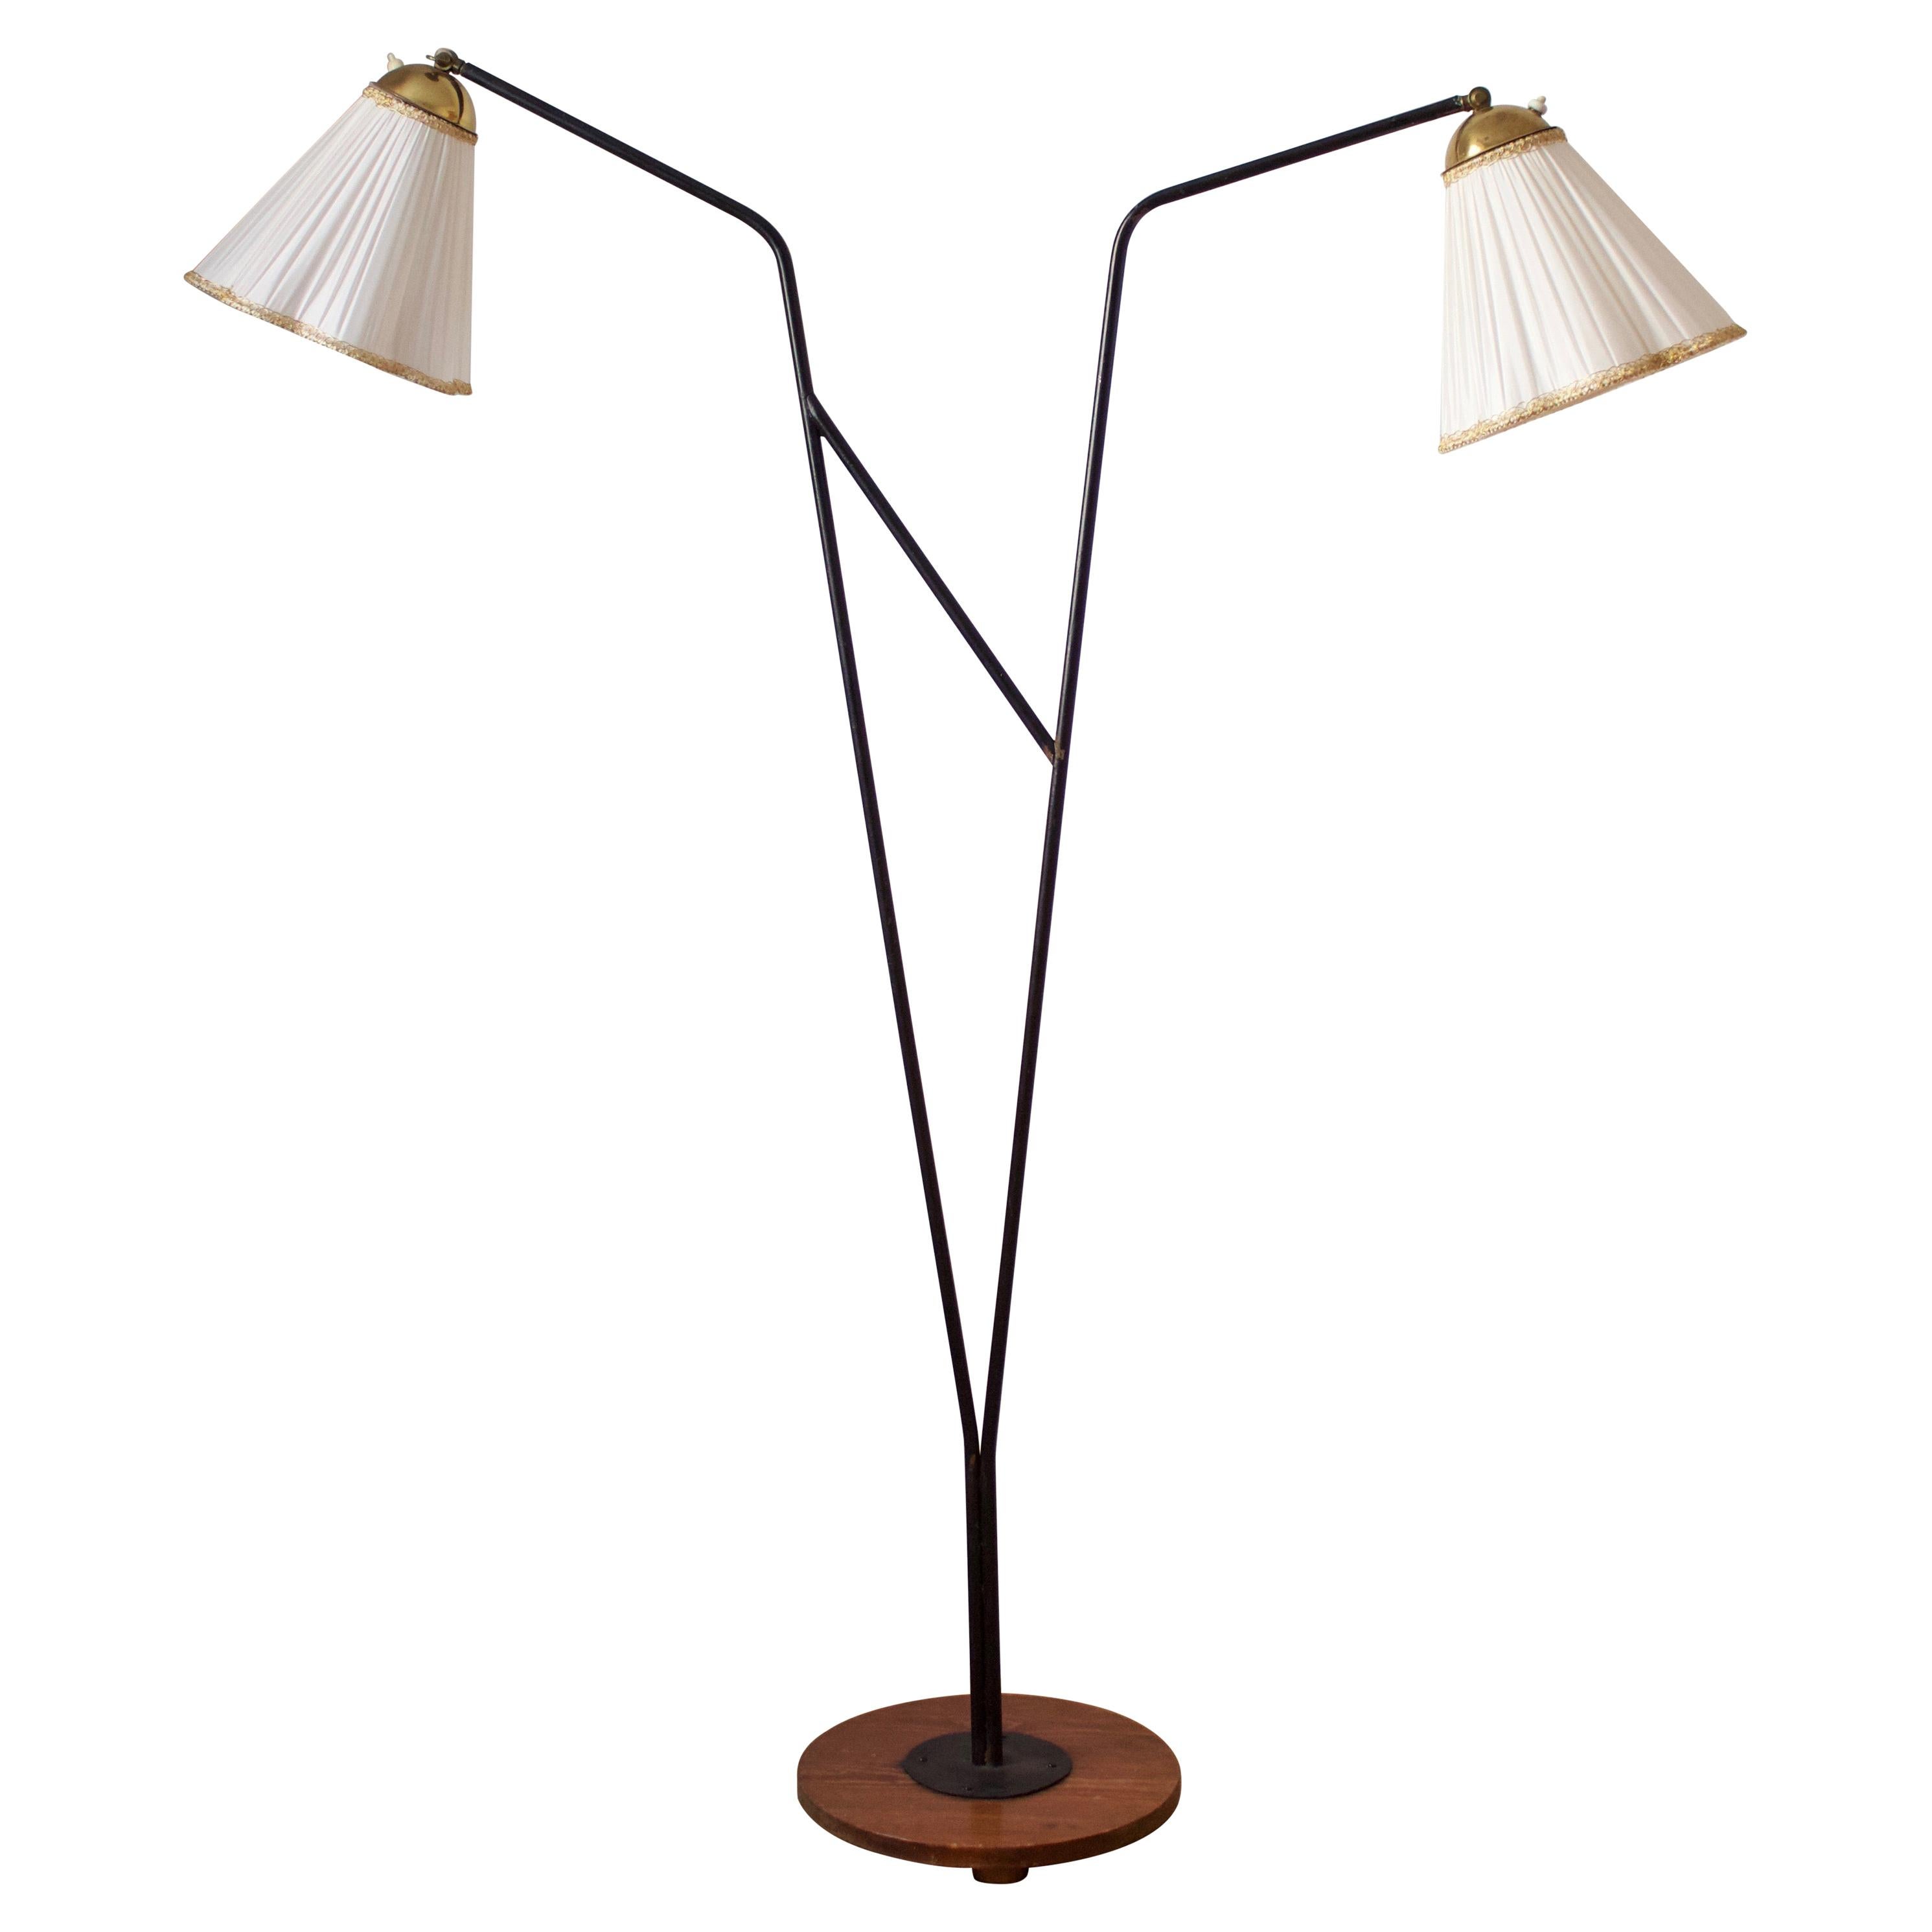 Swedish, Two-Armed Floor Lamp, Lacquered Metal, Brass, Wood, Fabric Sweden 1950s